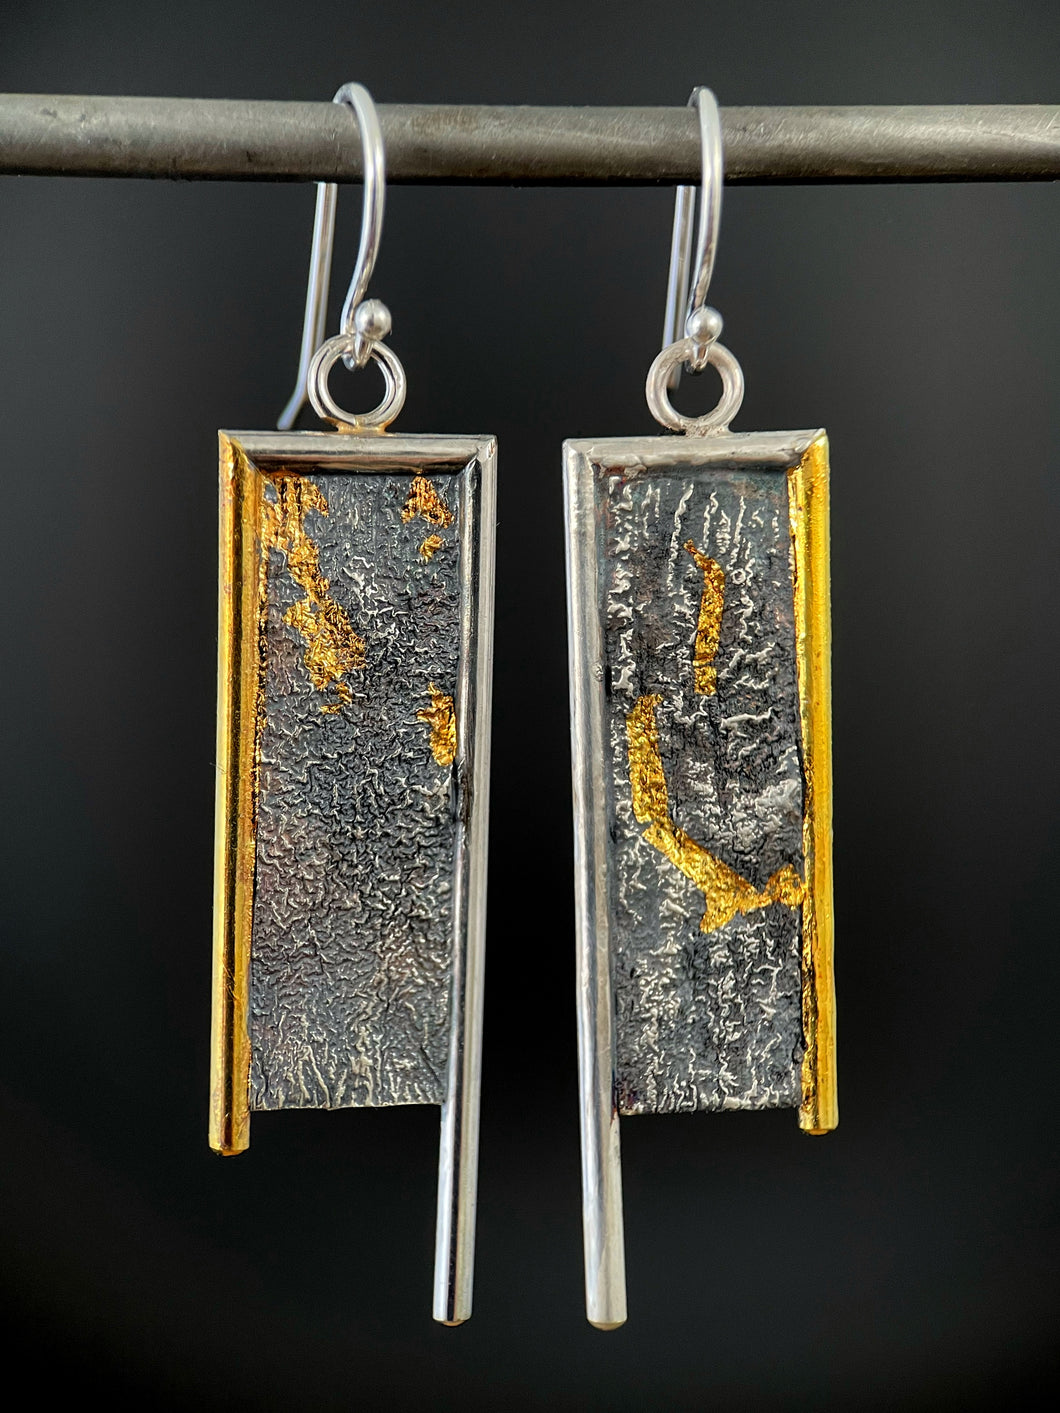 A rectangular pair of earrings, hanging vertically. The top and both sides are framed in wire - silver on the top and inside edge, gold on the outside edge. The silver border on each earring hangs lower, with the gold dropping just below the edge of the rectangle. The center of the rectangle is reticulated silver, in a textured, terrain-like pattern. There are dots of gold on the left earring, and a deep, curving line of gold on the right earring running from mid-top down and then hooking to the right.